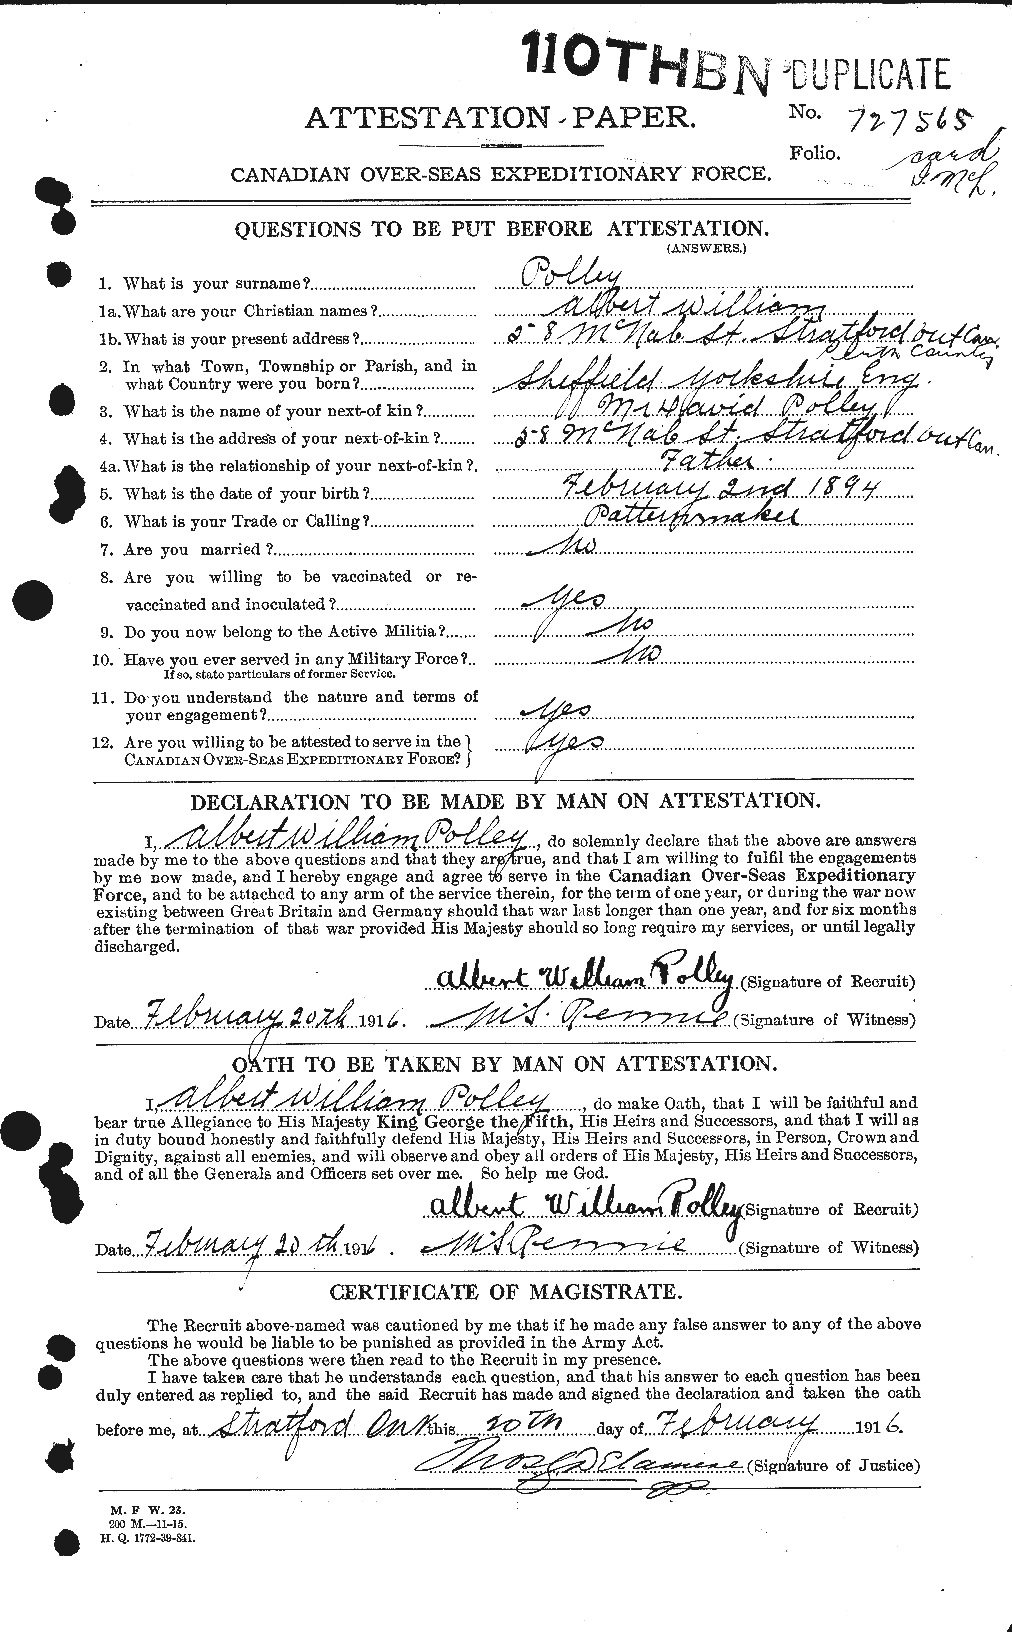 Personnel Records of the First World War - CEF 579820a